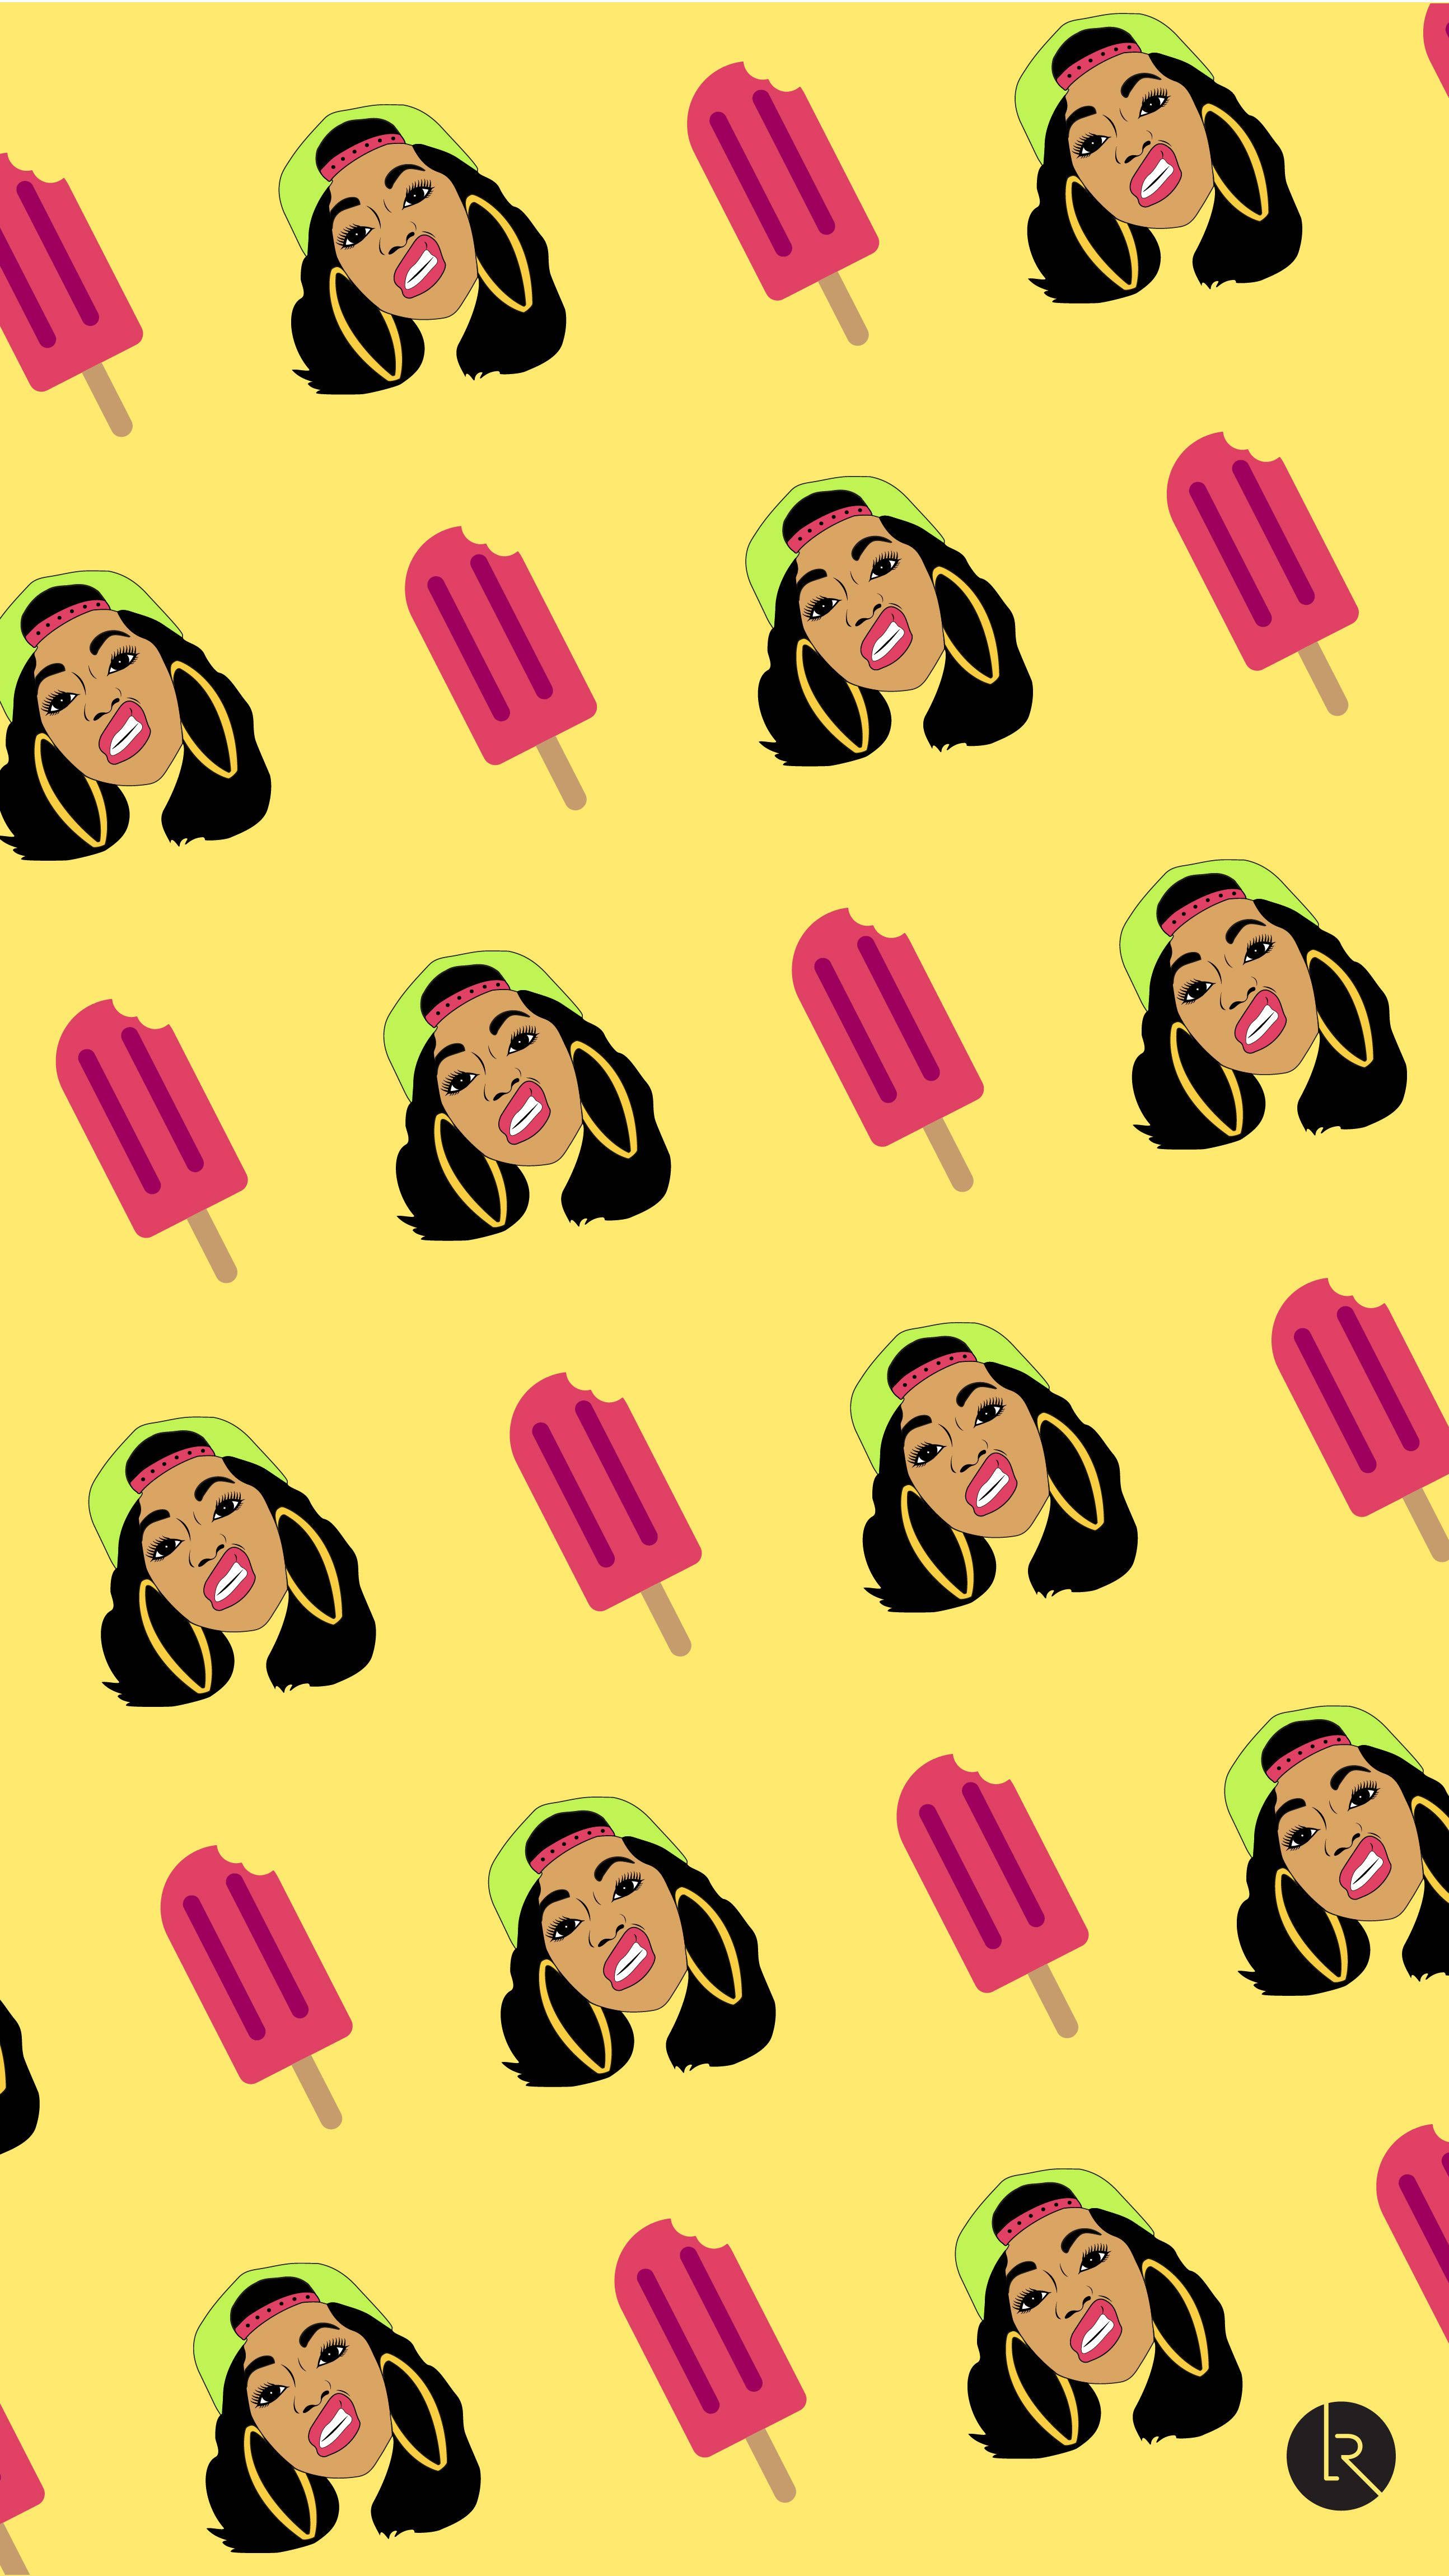 A pattern of Cardi B's face and popsicles on a yellow background. - Cardi B